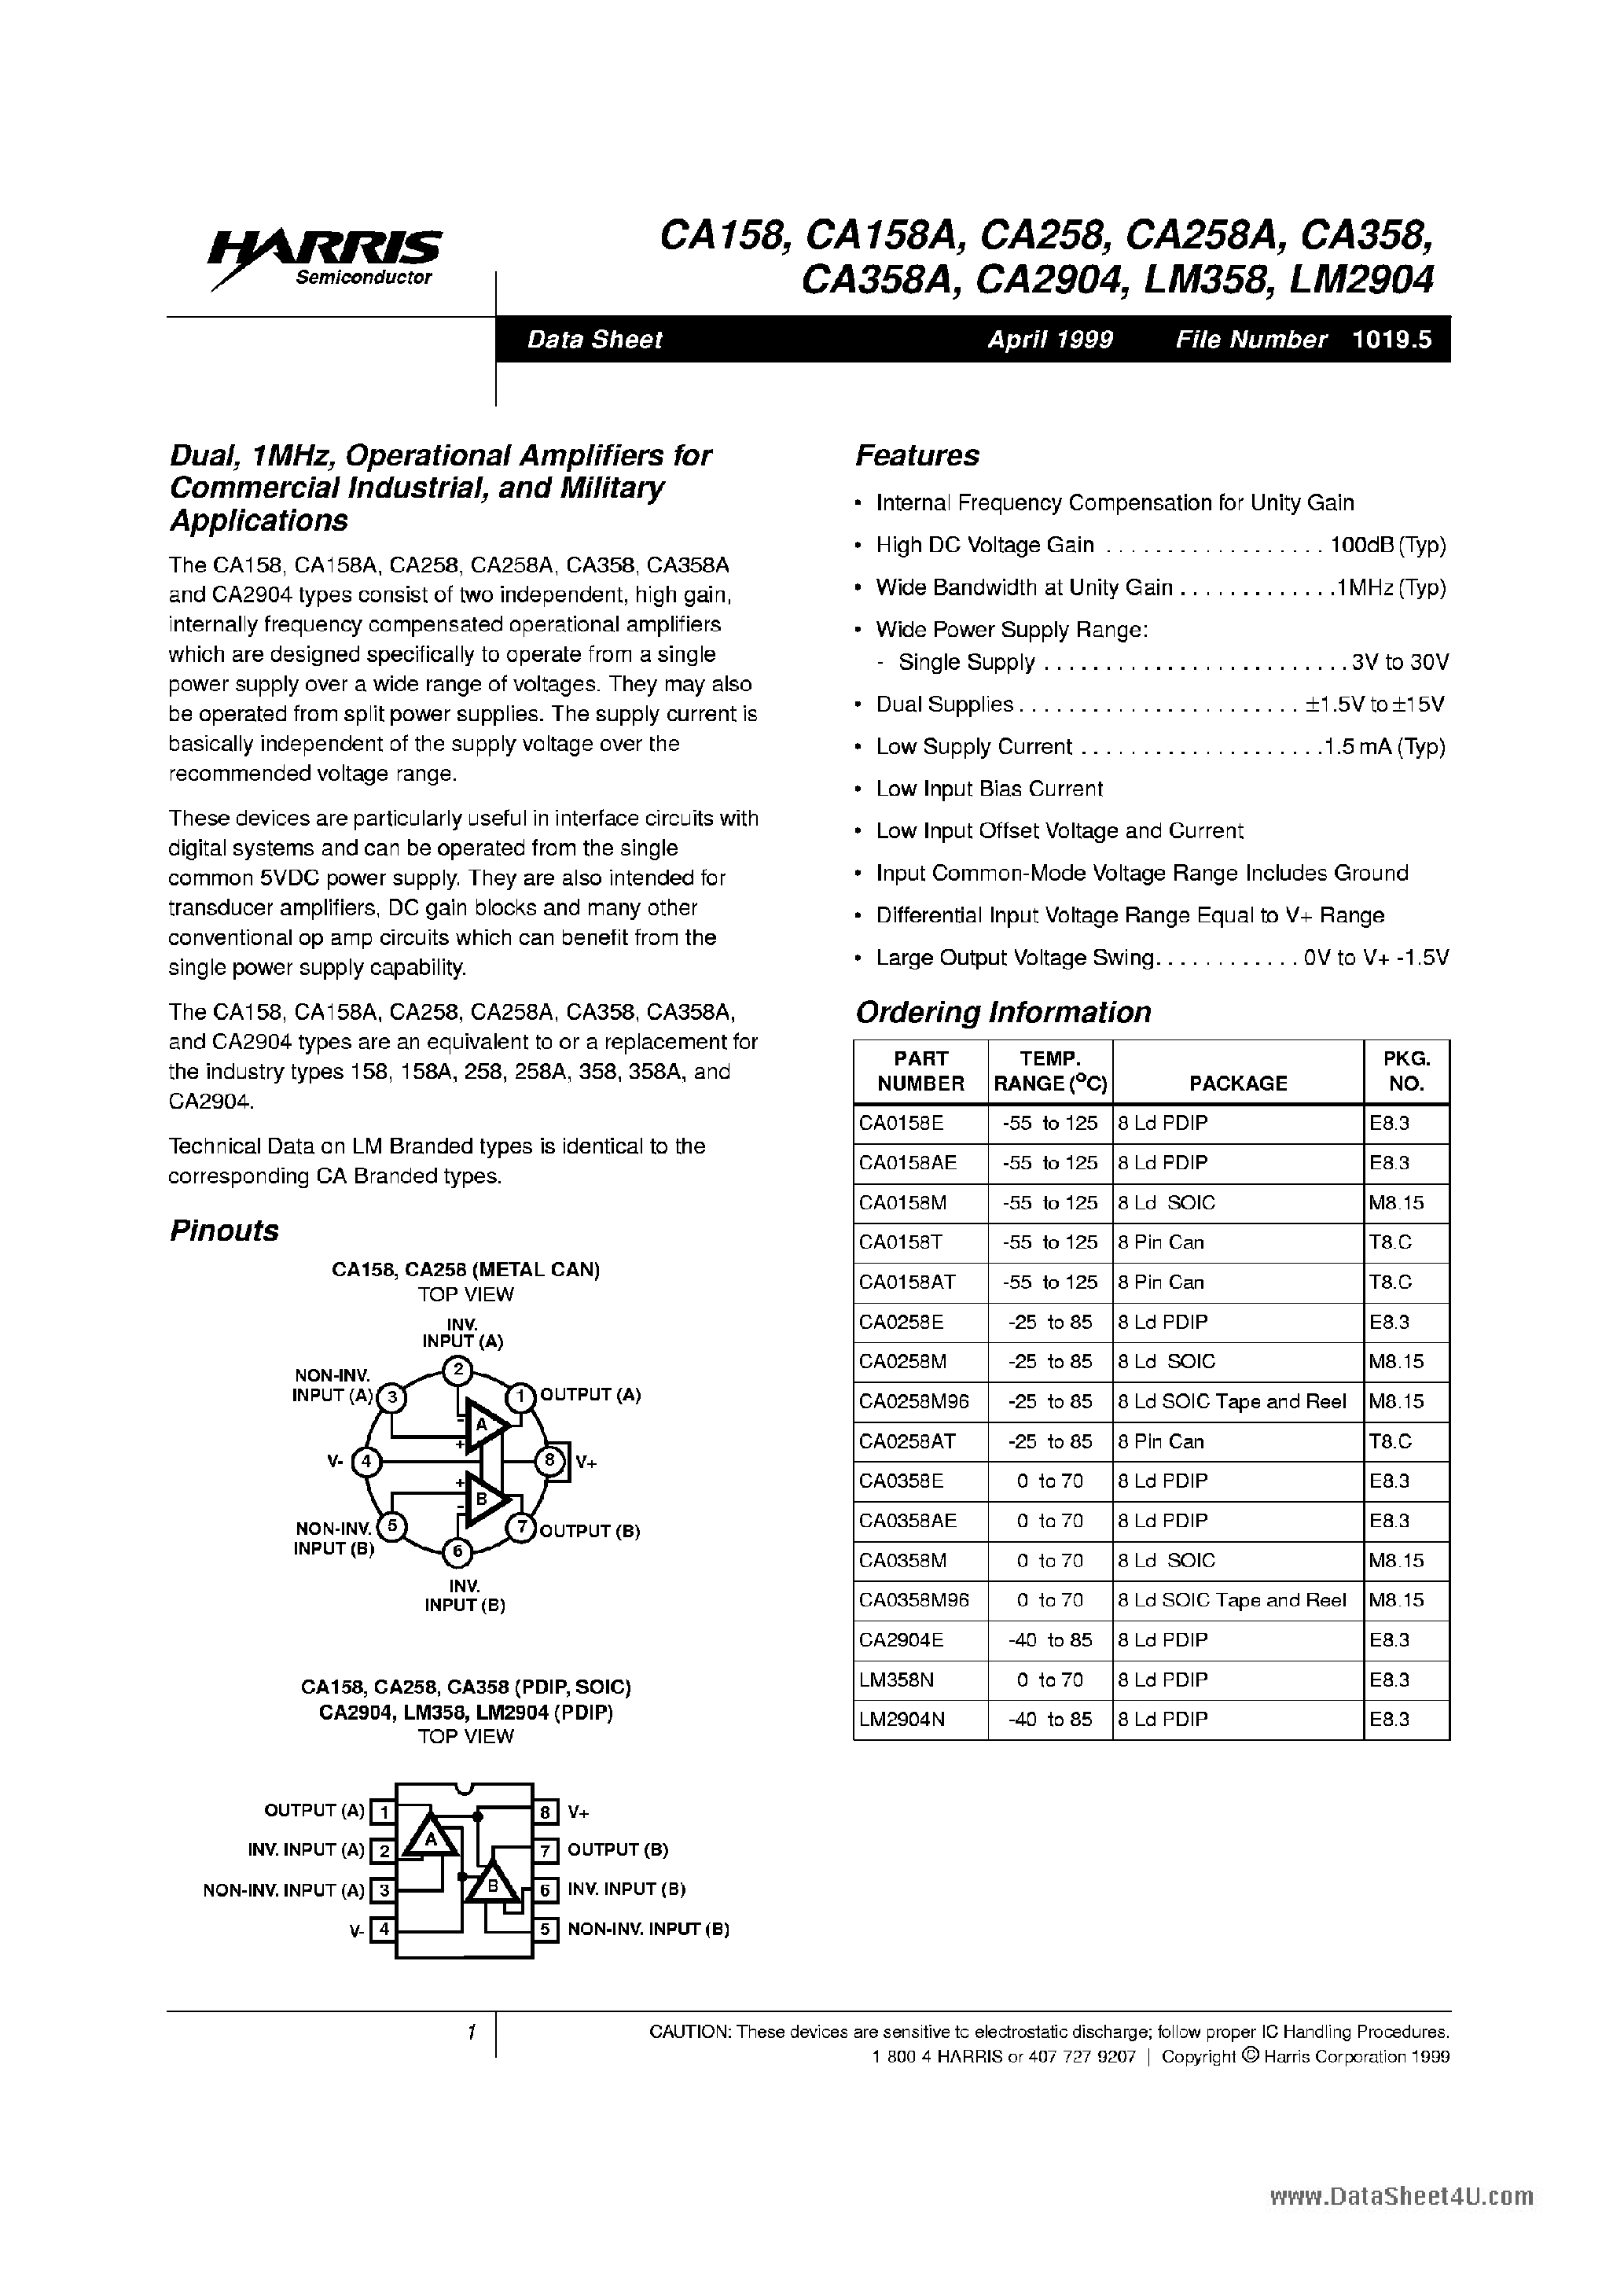 Datasheet CA2904 - 1MHz OPERATIONAL AMPLIFIERS page 1